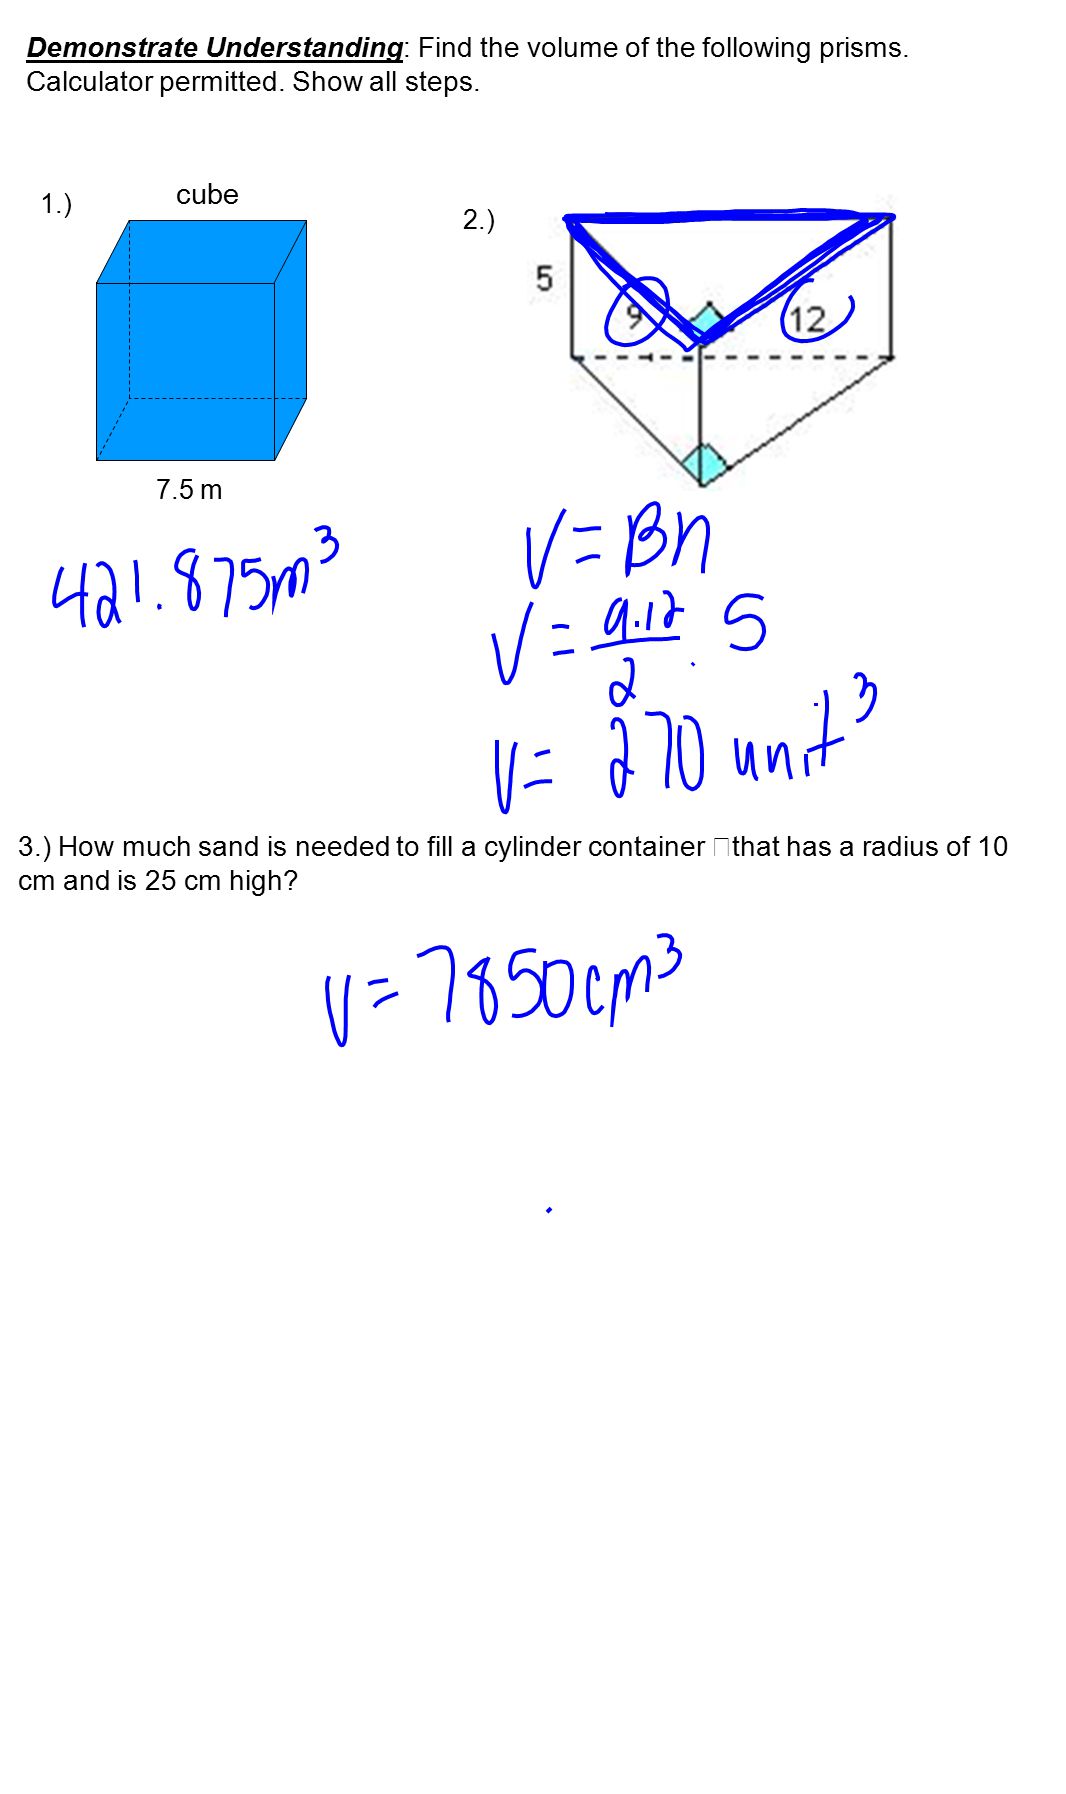 Demonstrate Understanding: Find the volume of the following prisms.